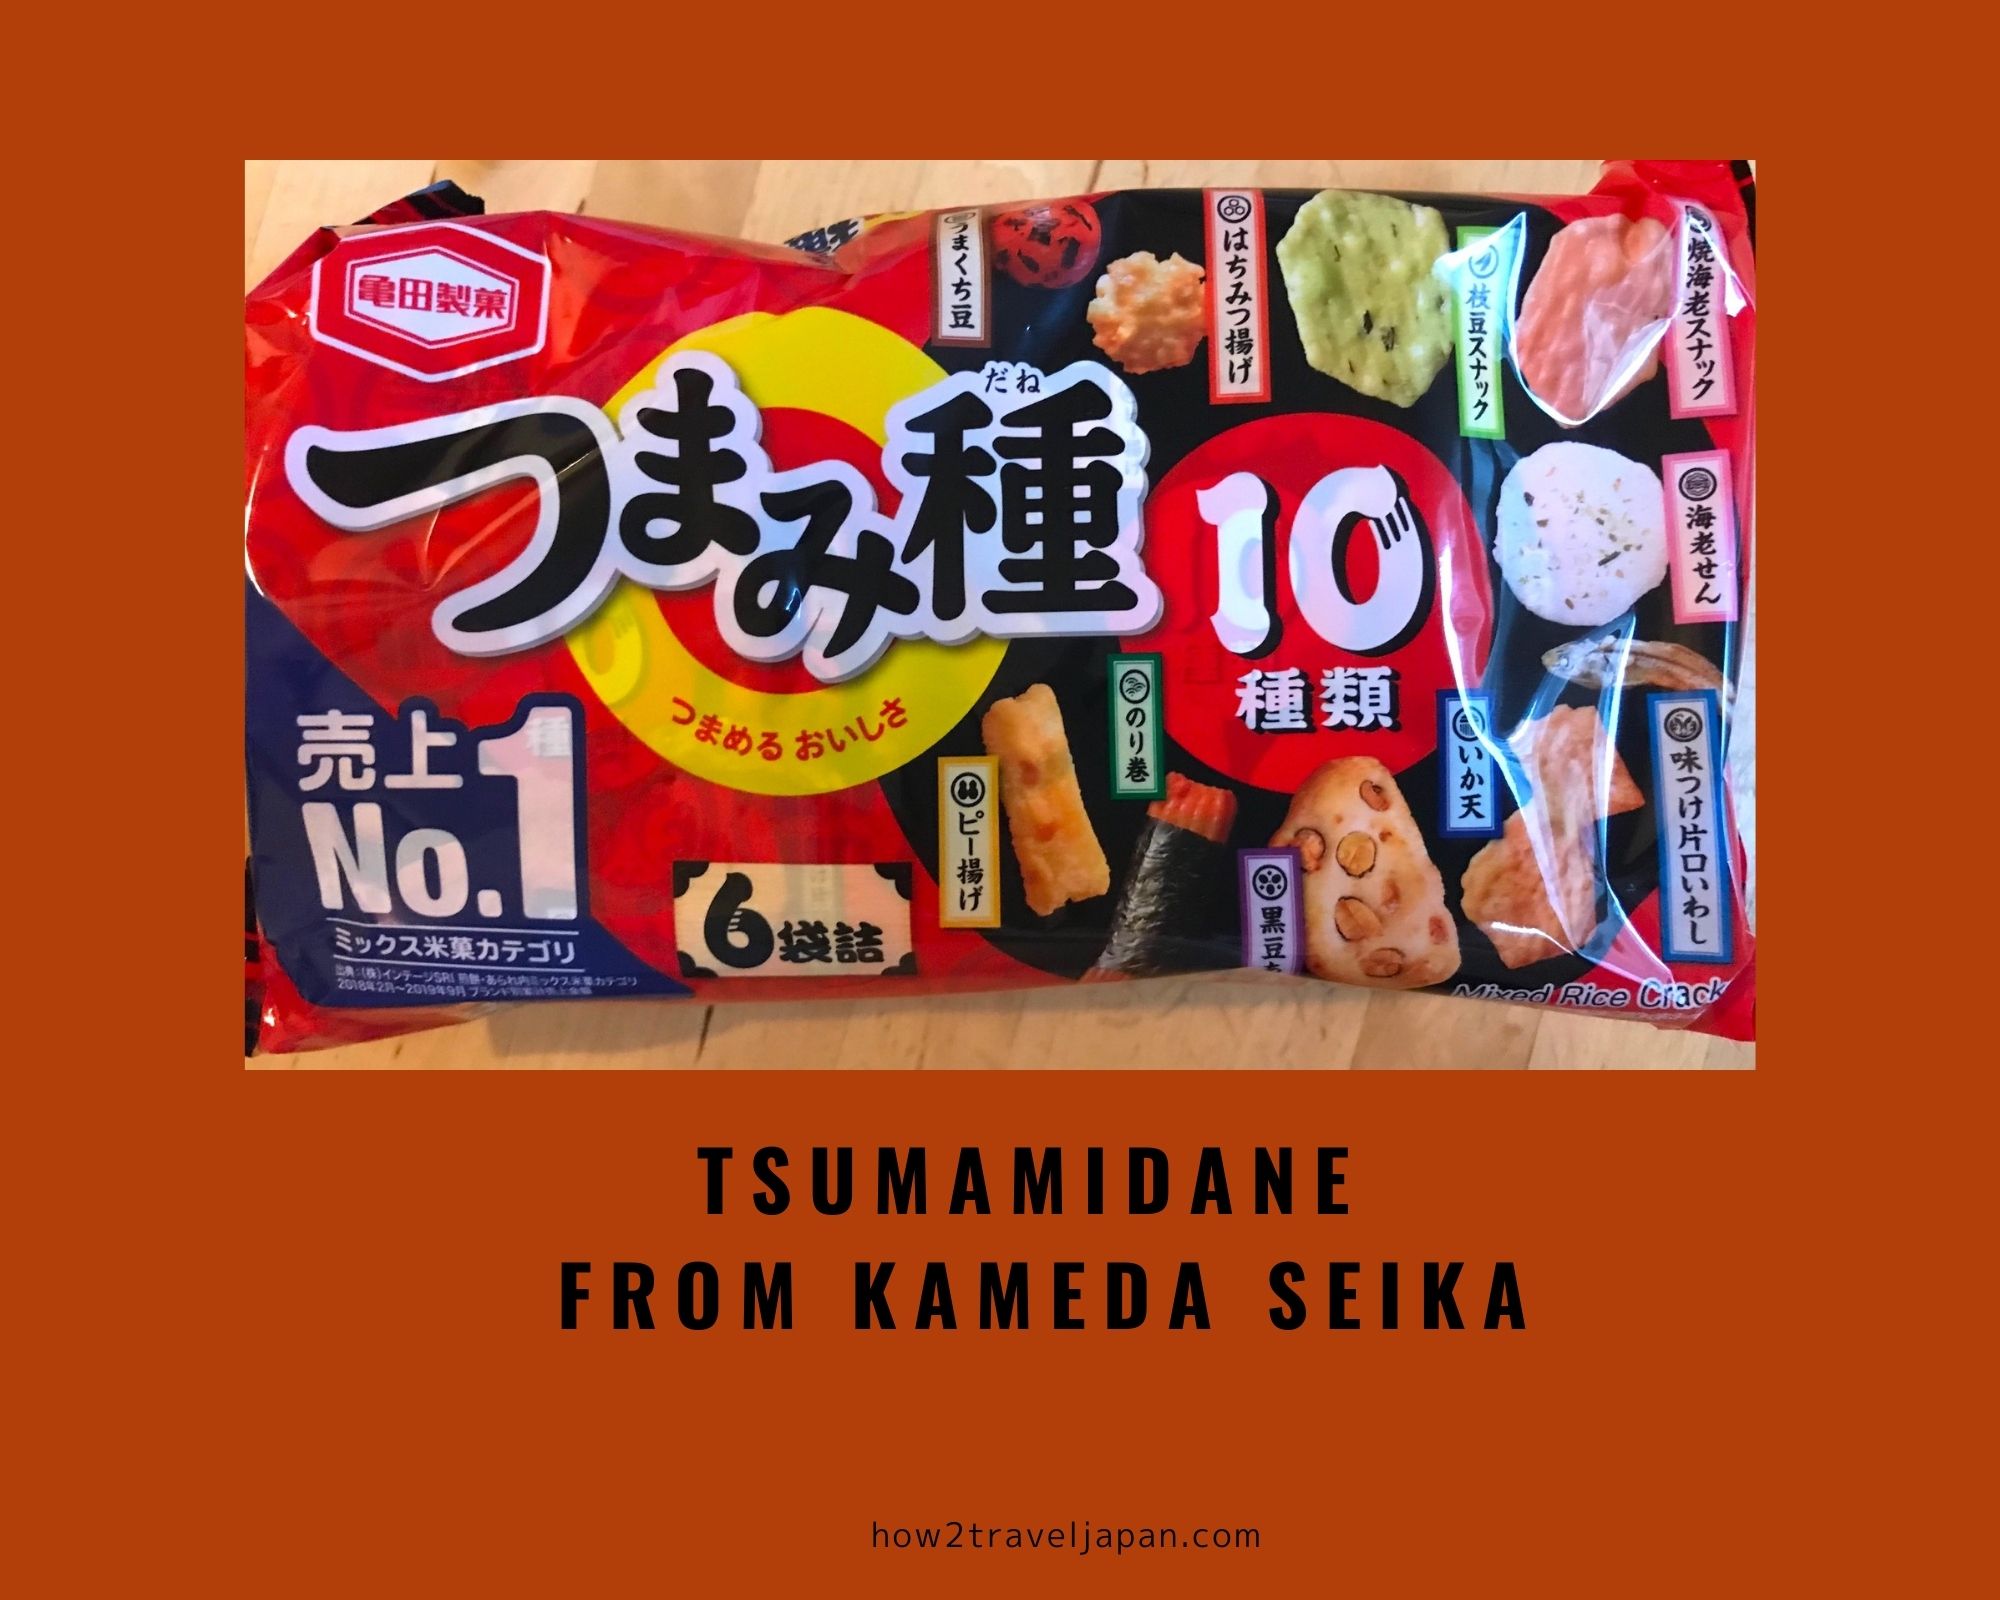 You are currently viewing Tsumamidane from Kameda seika, Nr.1 sales “mixed rice snacks” in Japan